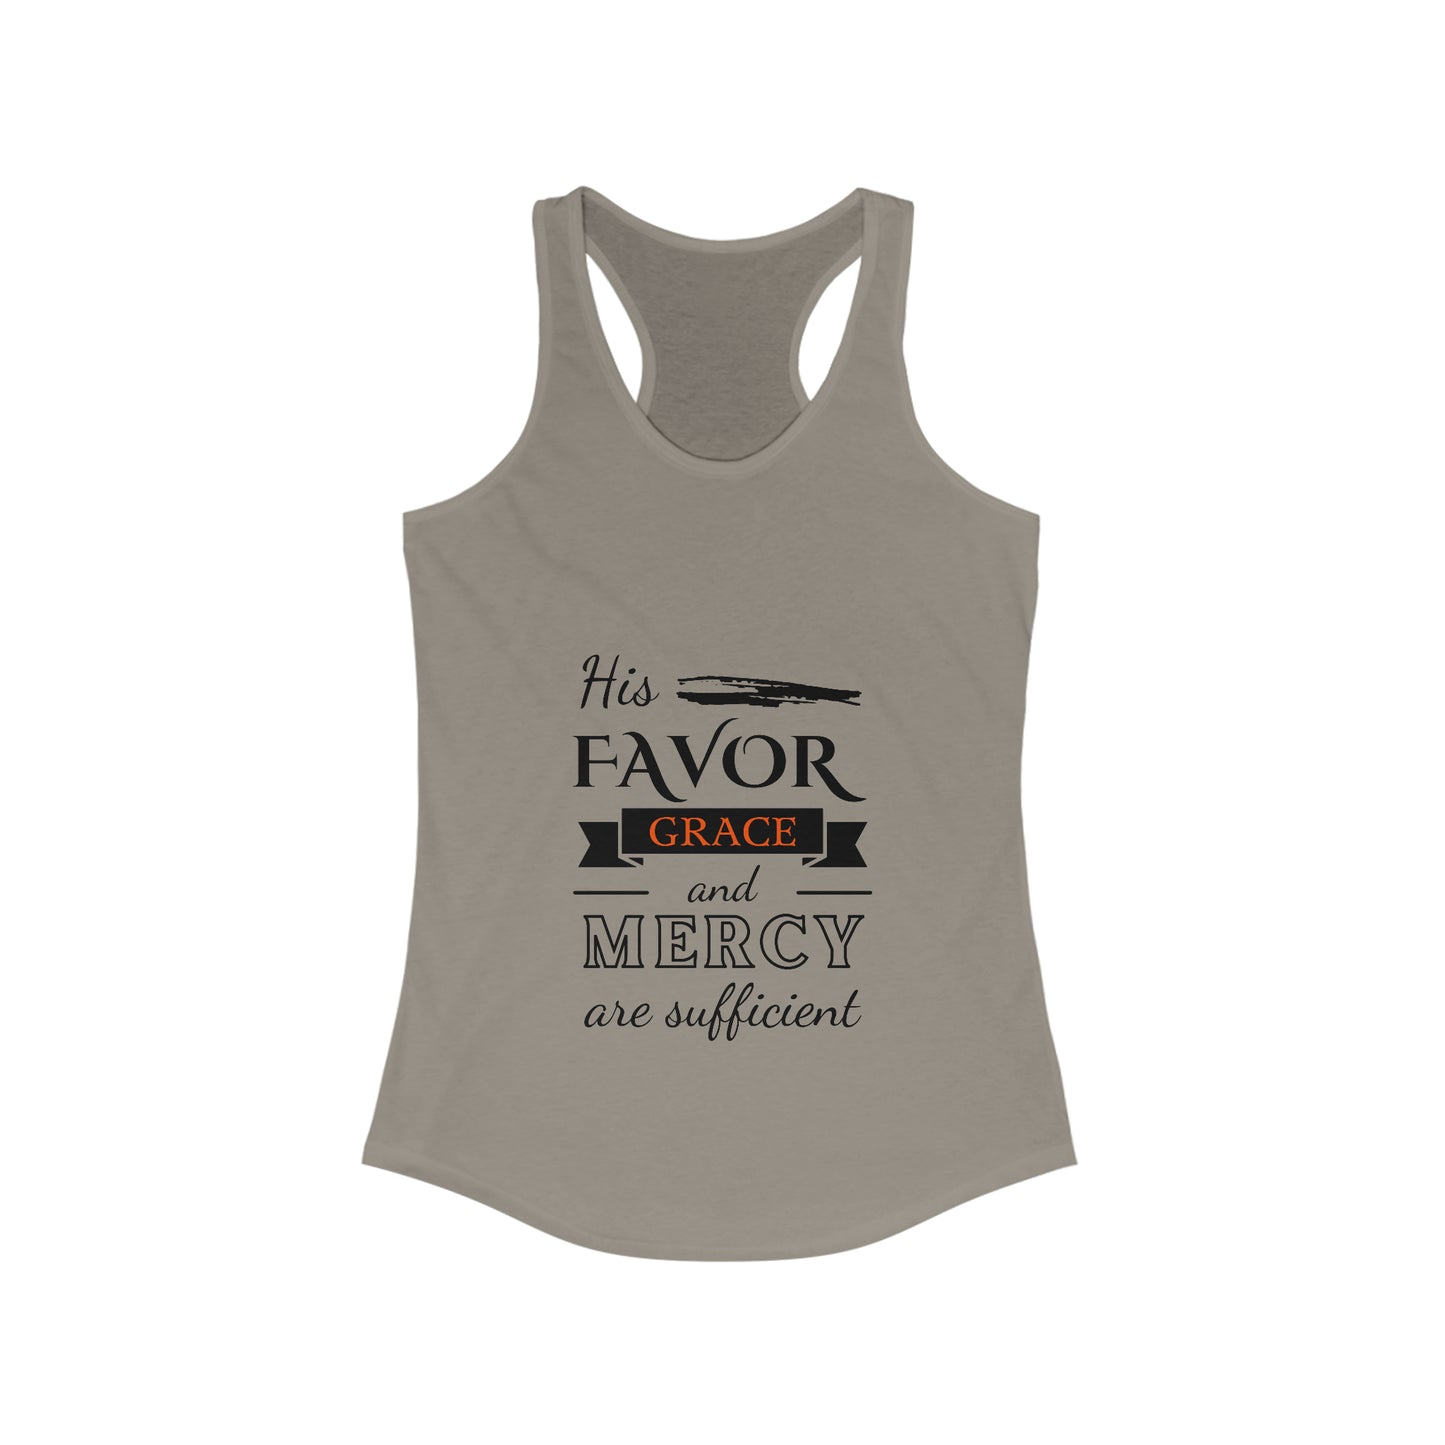 His Favor Grace and Mercy Are Sufficient slim fit tank-top